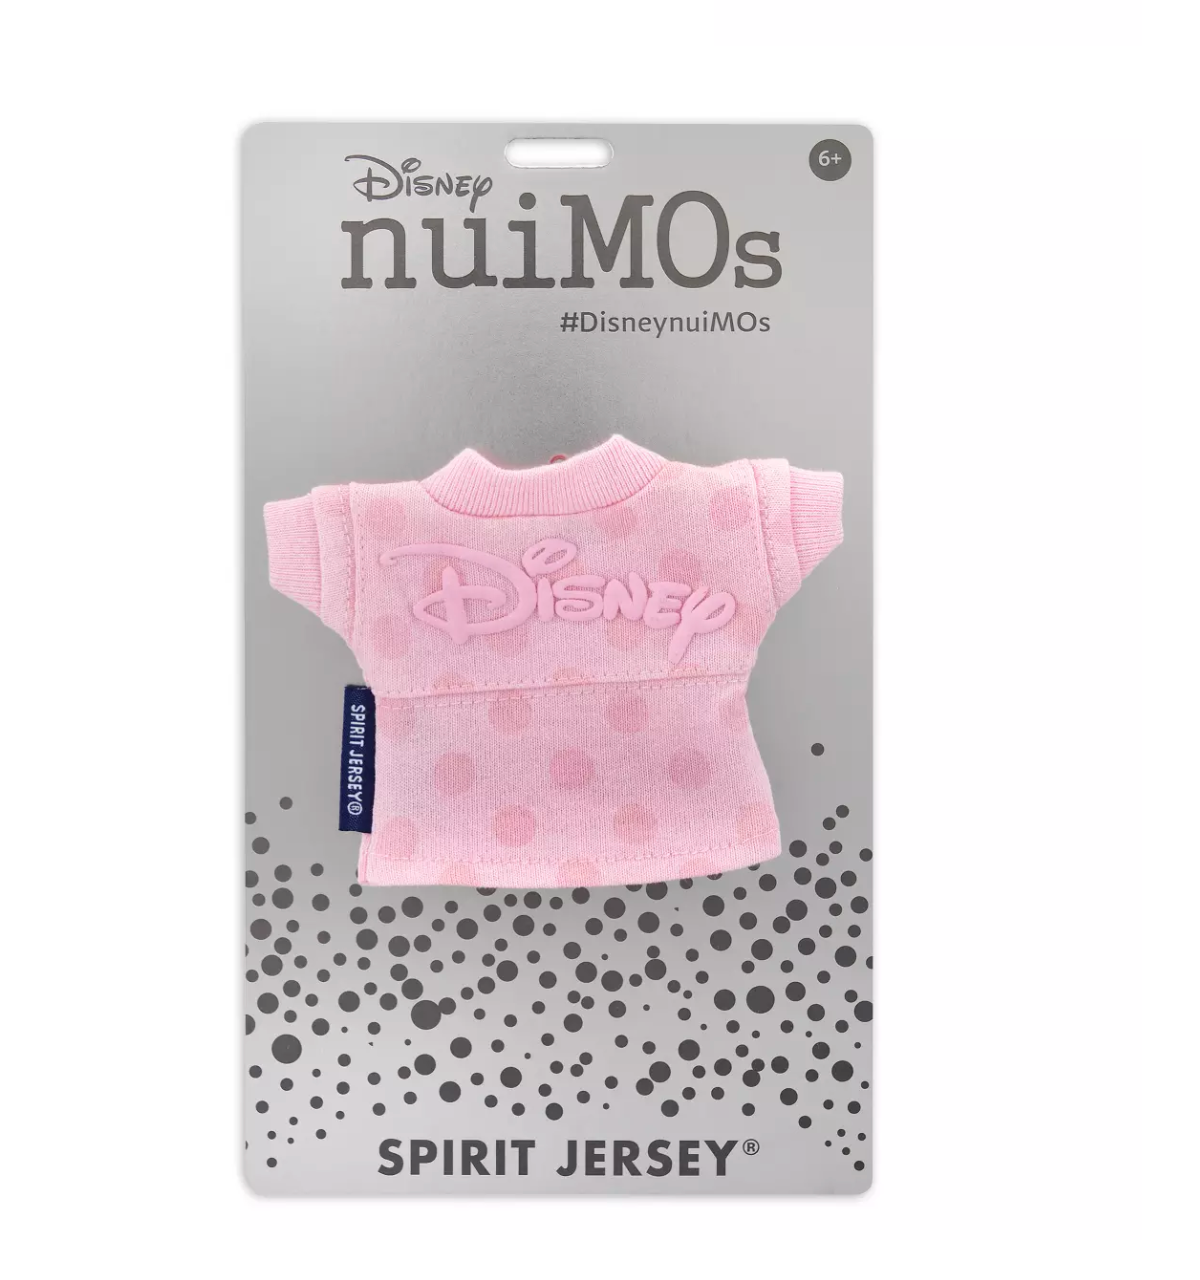 Disney NuiMOs Outfit Disney Spirit Jersey Piglet Pink New with Card